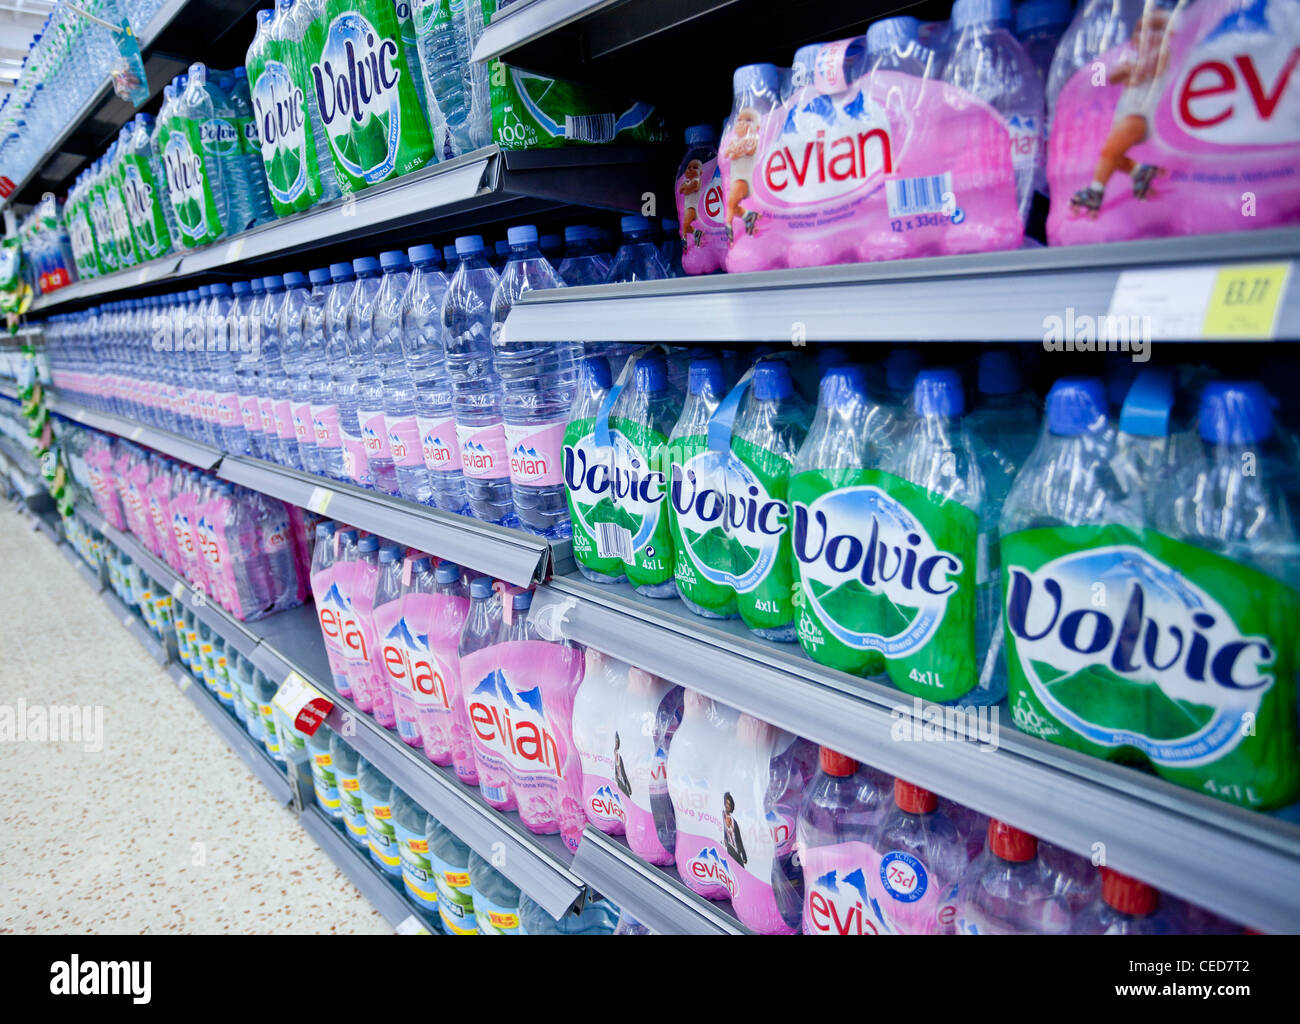 shelves with bottles of water for sale, England, Uk Stock Photo